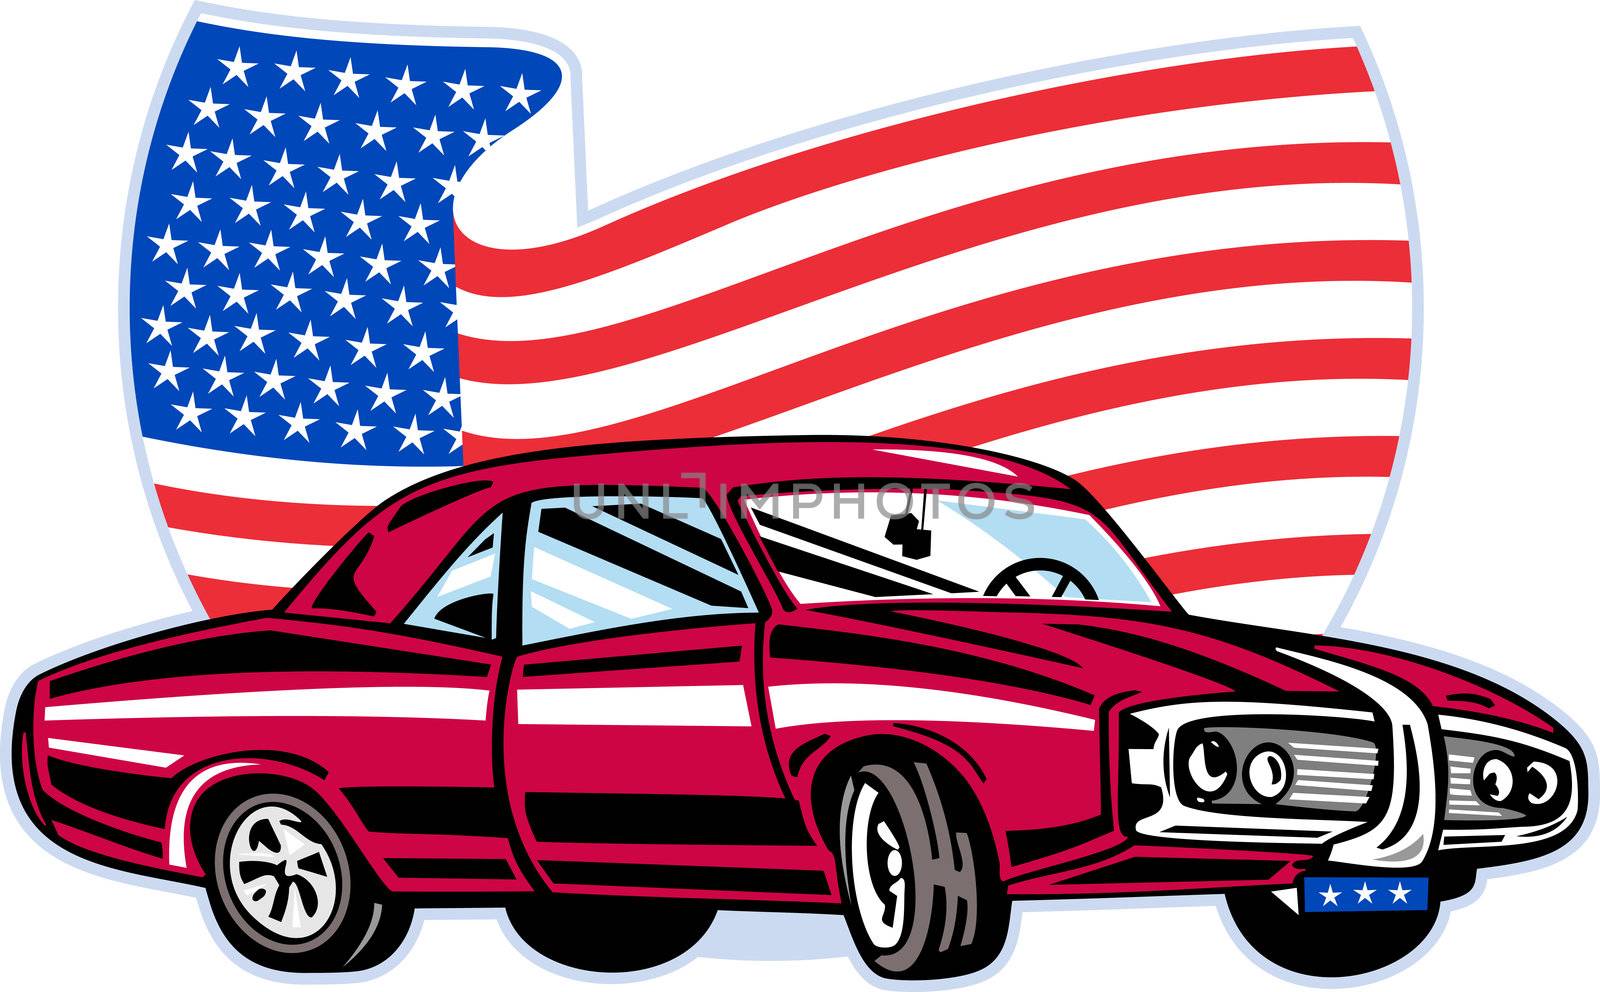 American muscle car with flag by patrimonio